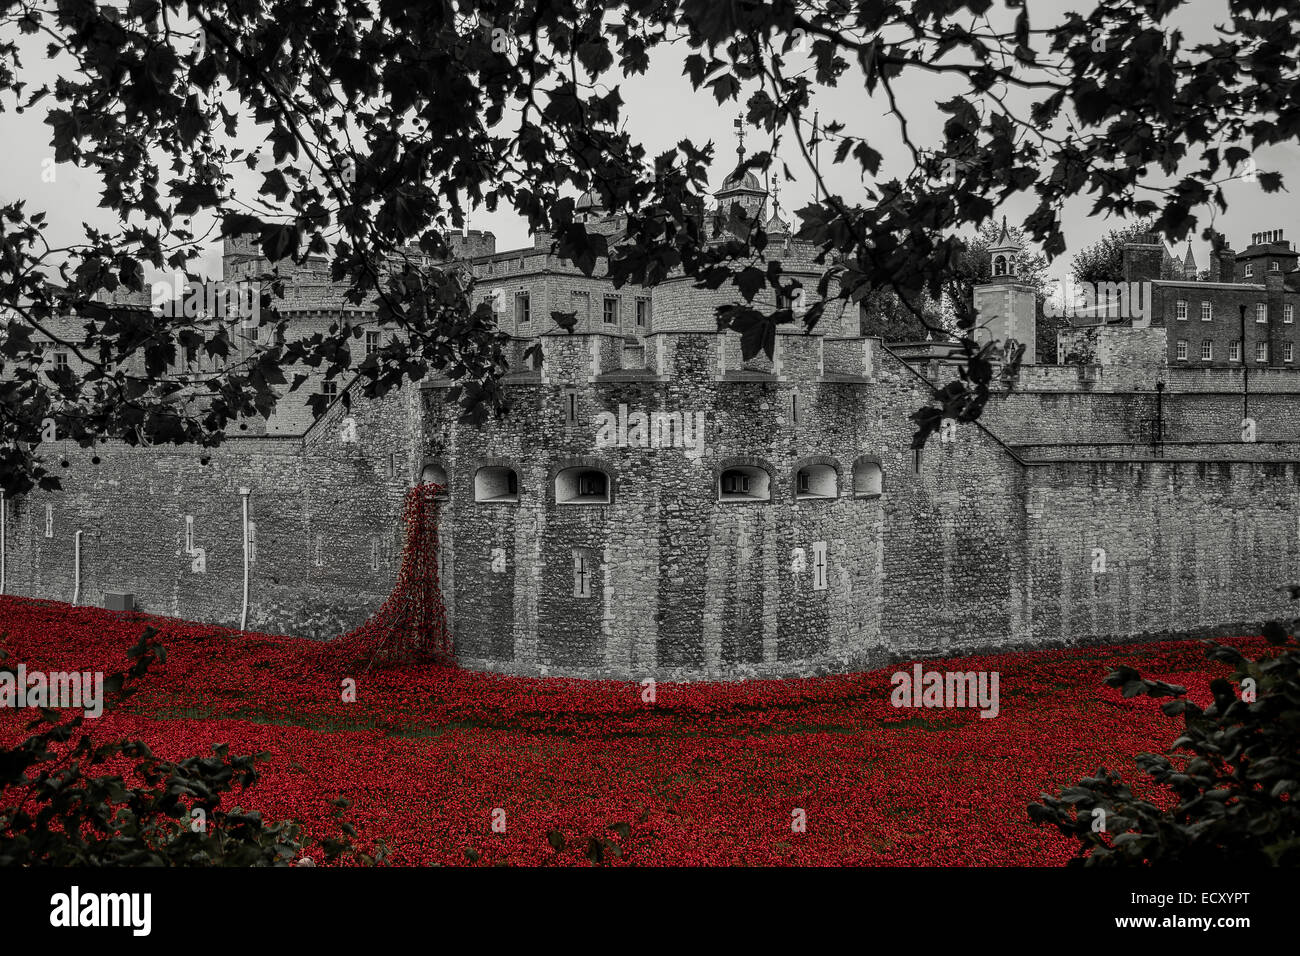 The Poppies at the Tower of London for the remembrance of world war 1 Stock Photo